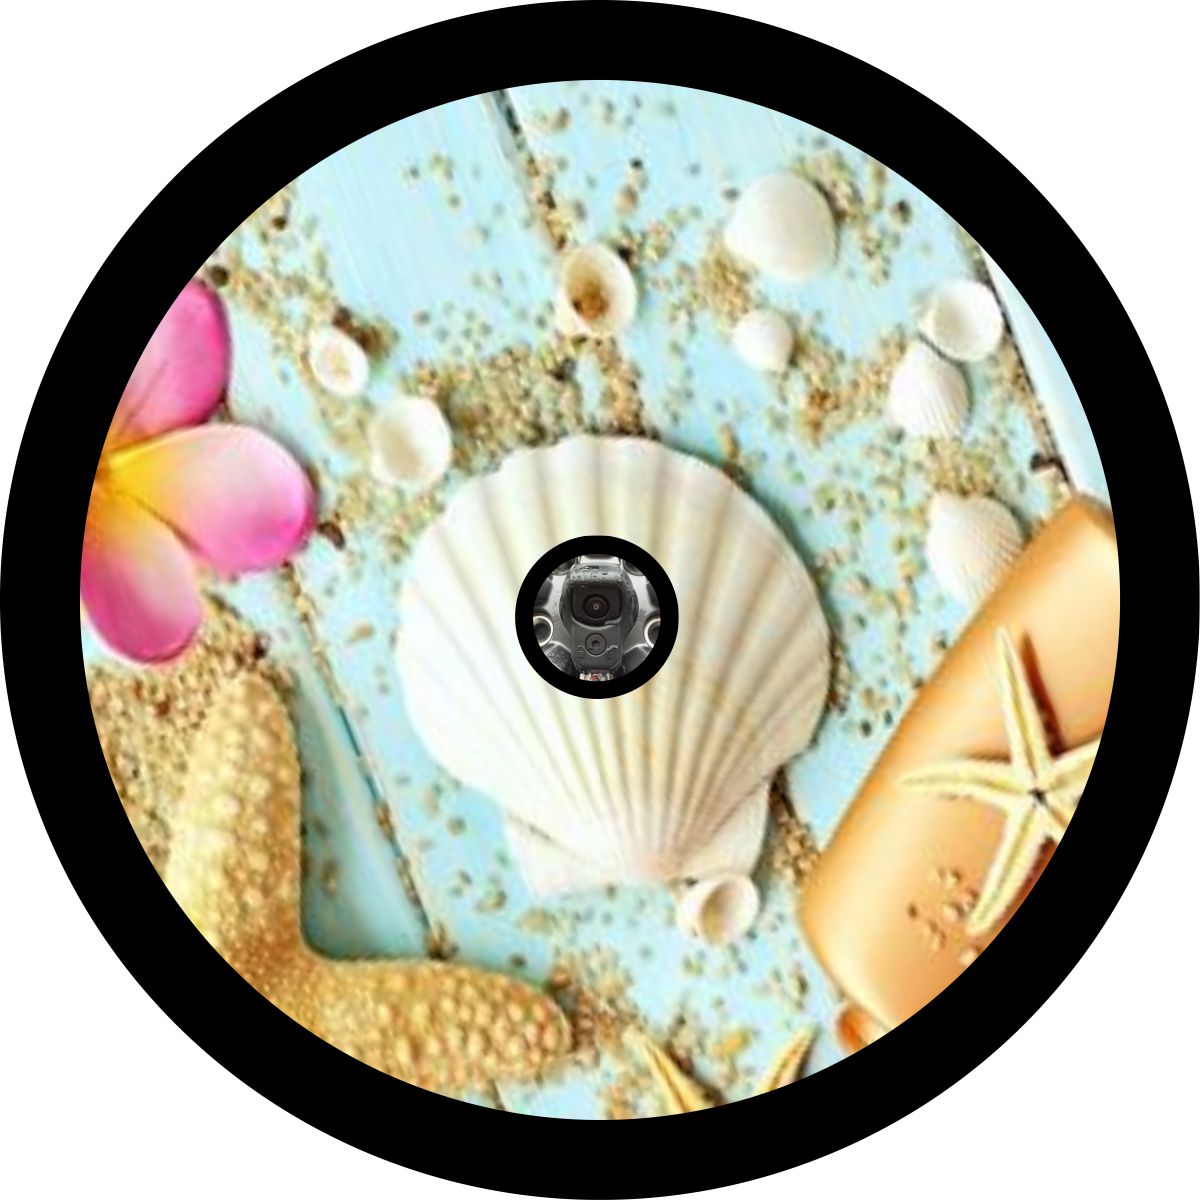 A spare tire cover mock up design of seashells, plumeria flower, starfish, and sand on wood with a center hole for a backup camera